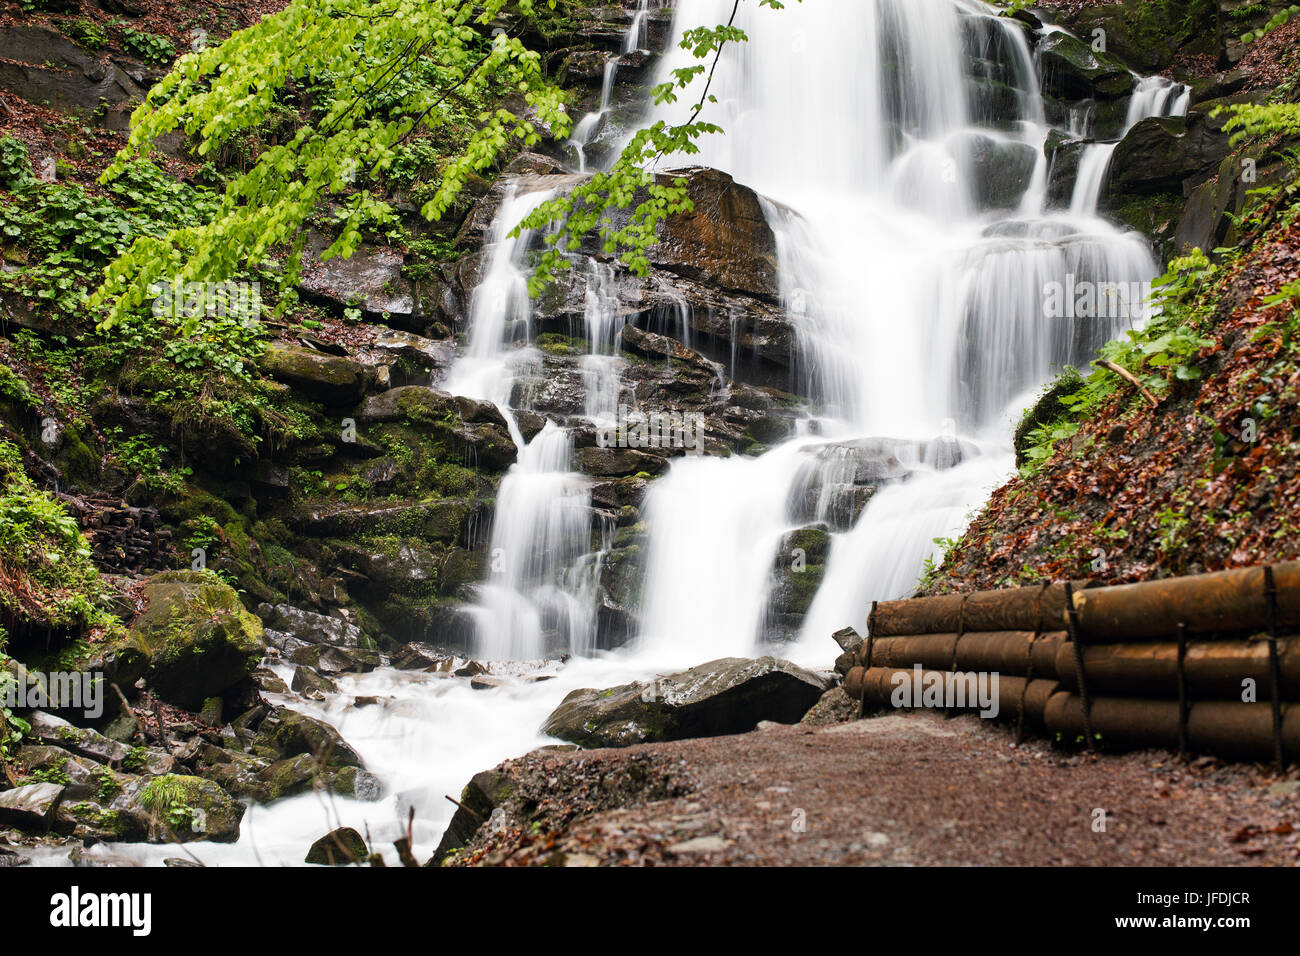 The rapid flow of water falls strongly from the height of the Carpathian mountain. Stock Photo